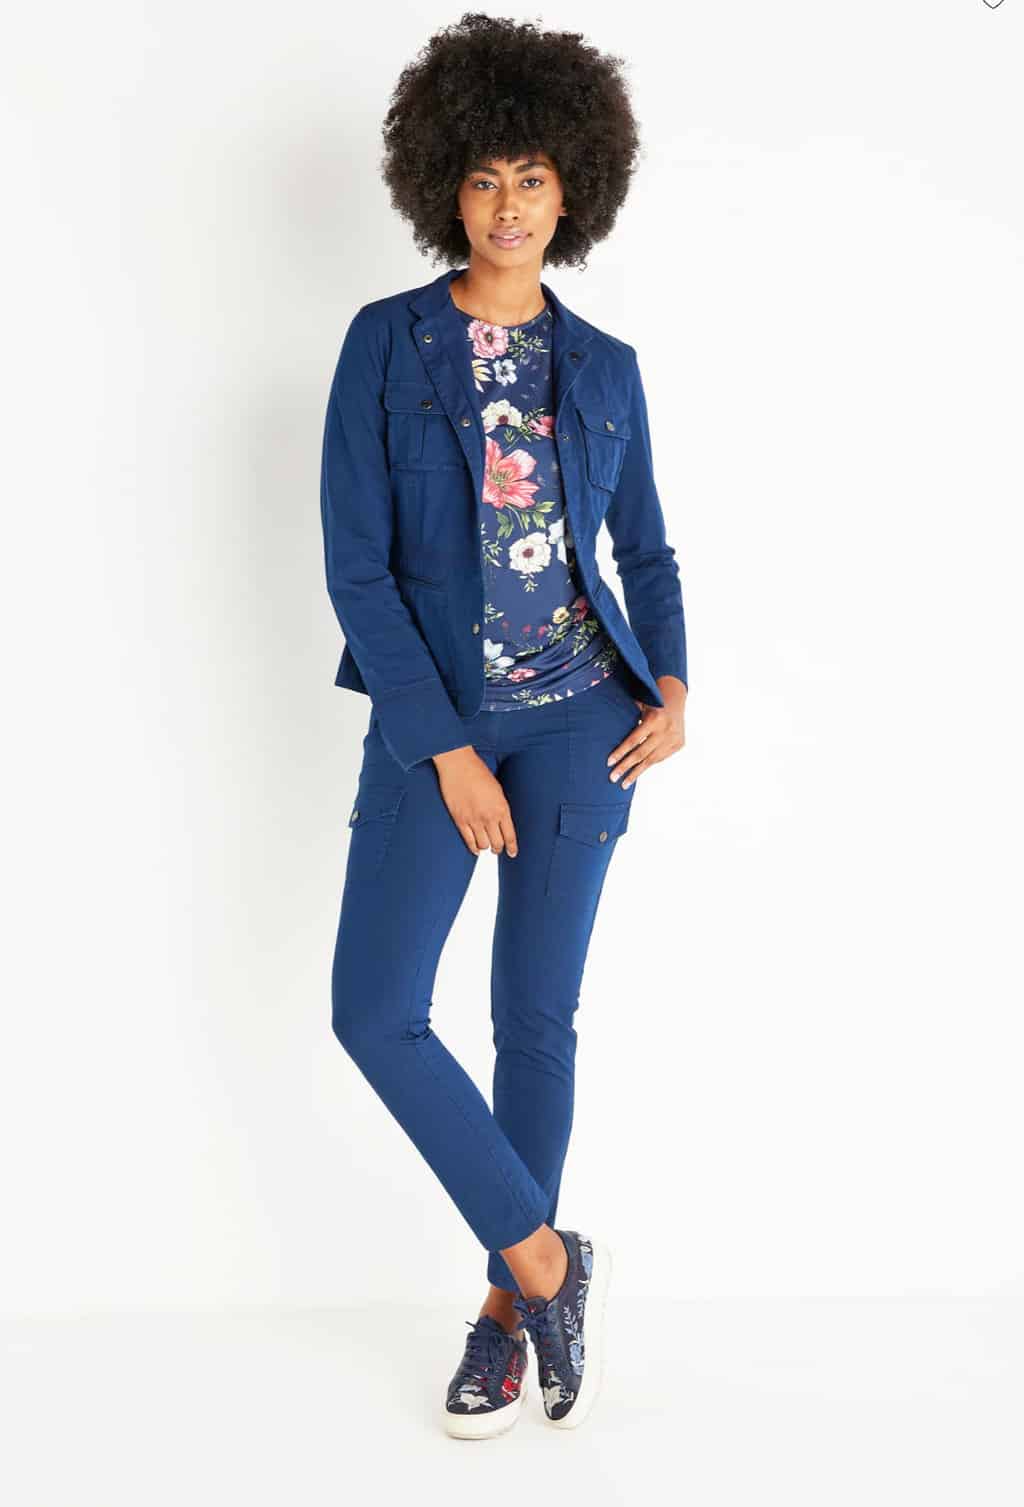 Attractive dark lady with a large afro modelling a blue denim travel outfit with a floral T-shirt and floral sneakers.